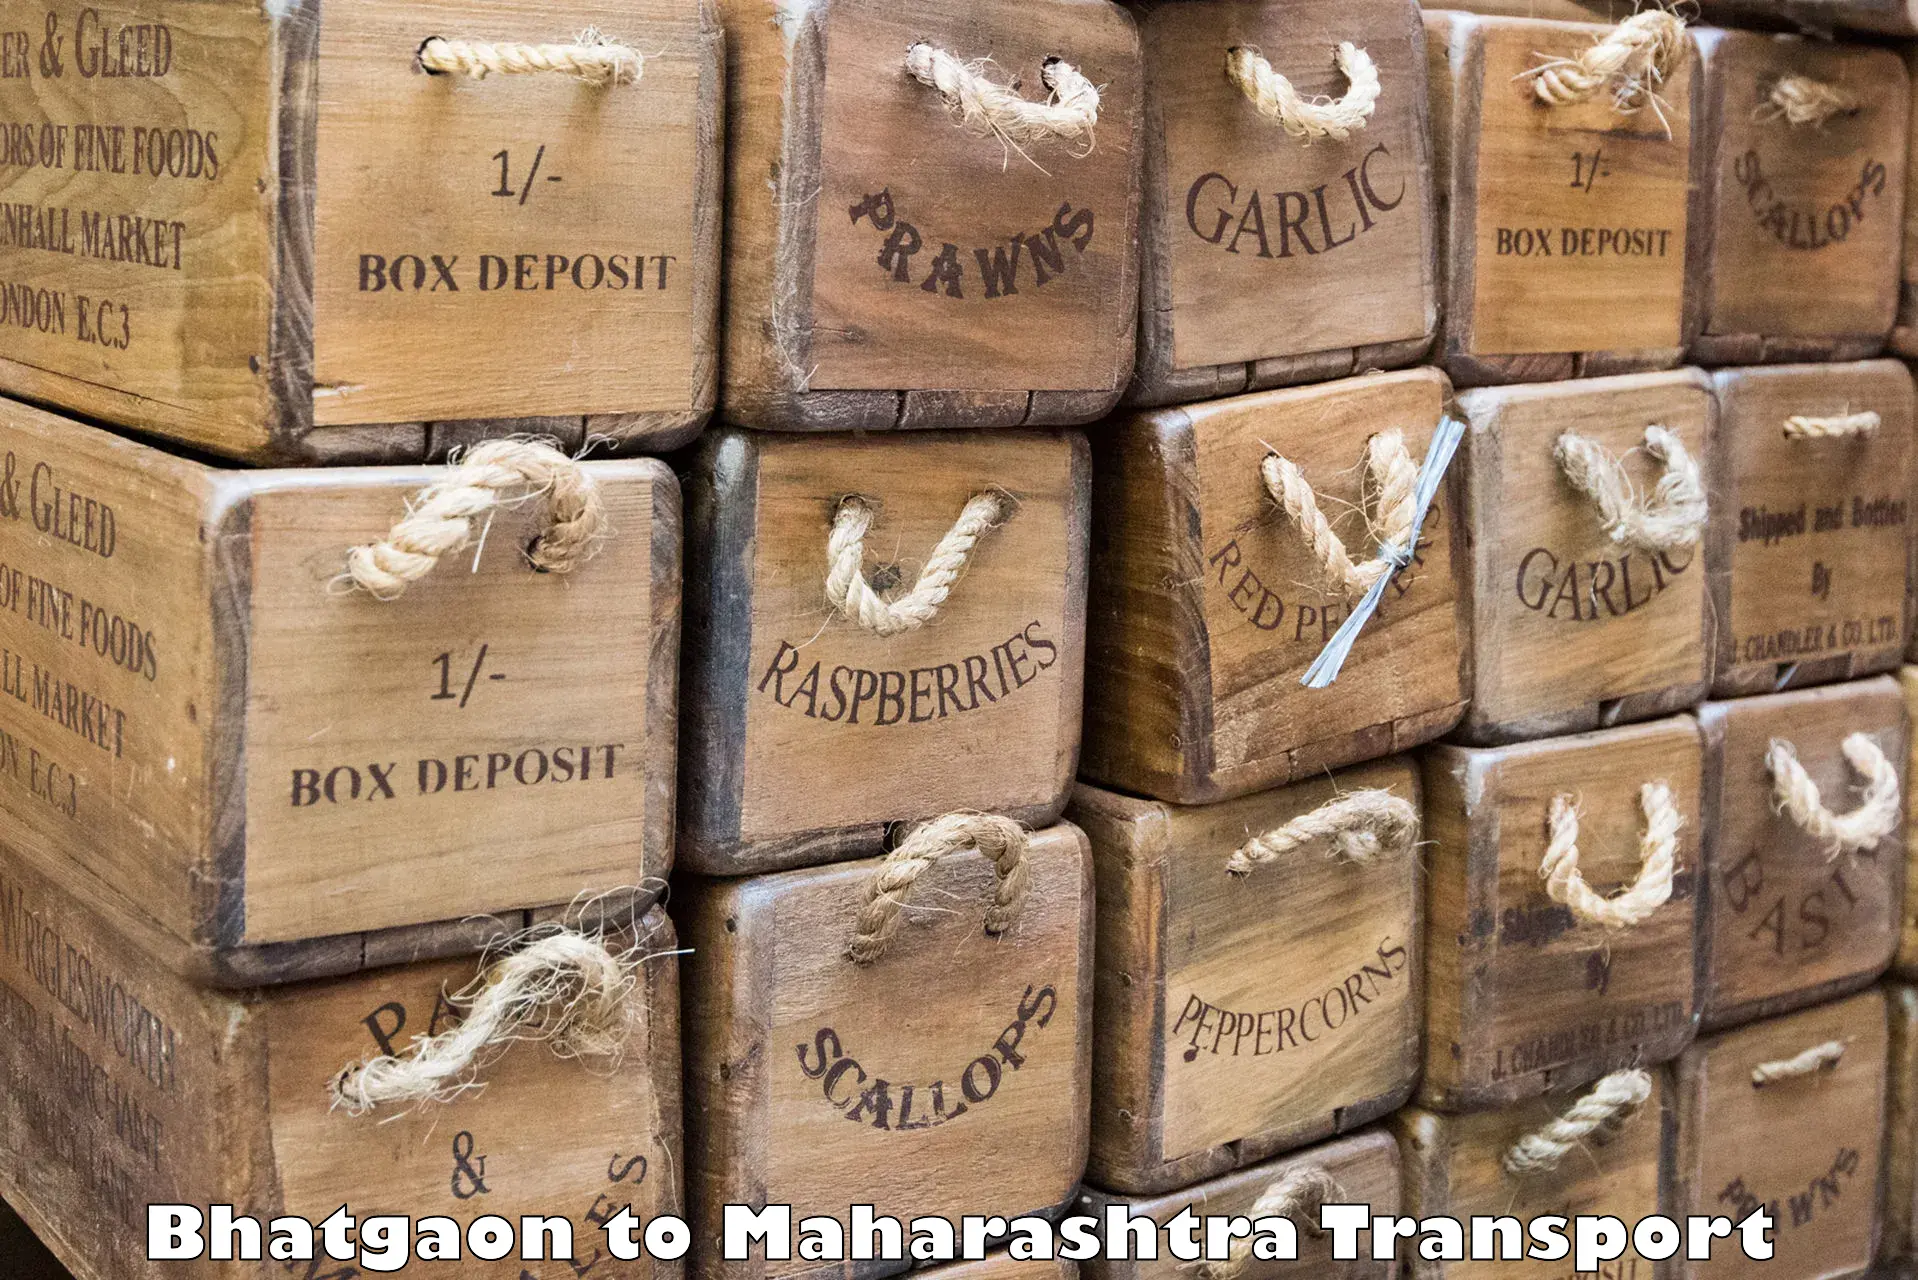 Truck transport companies in India in Bhatgaon to Barshi